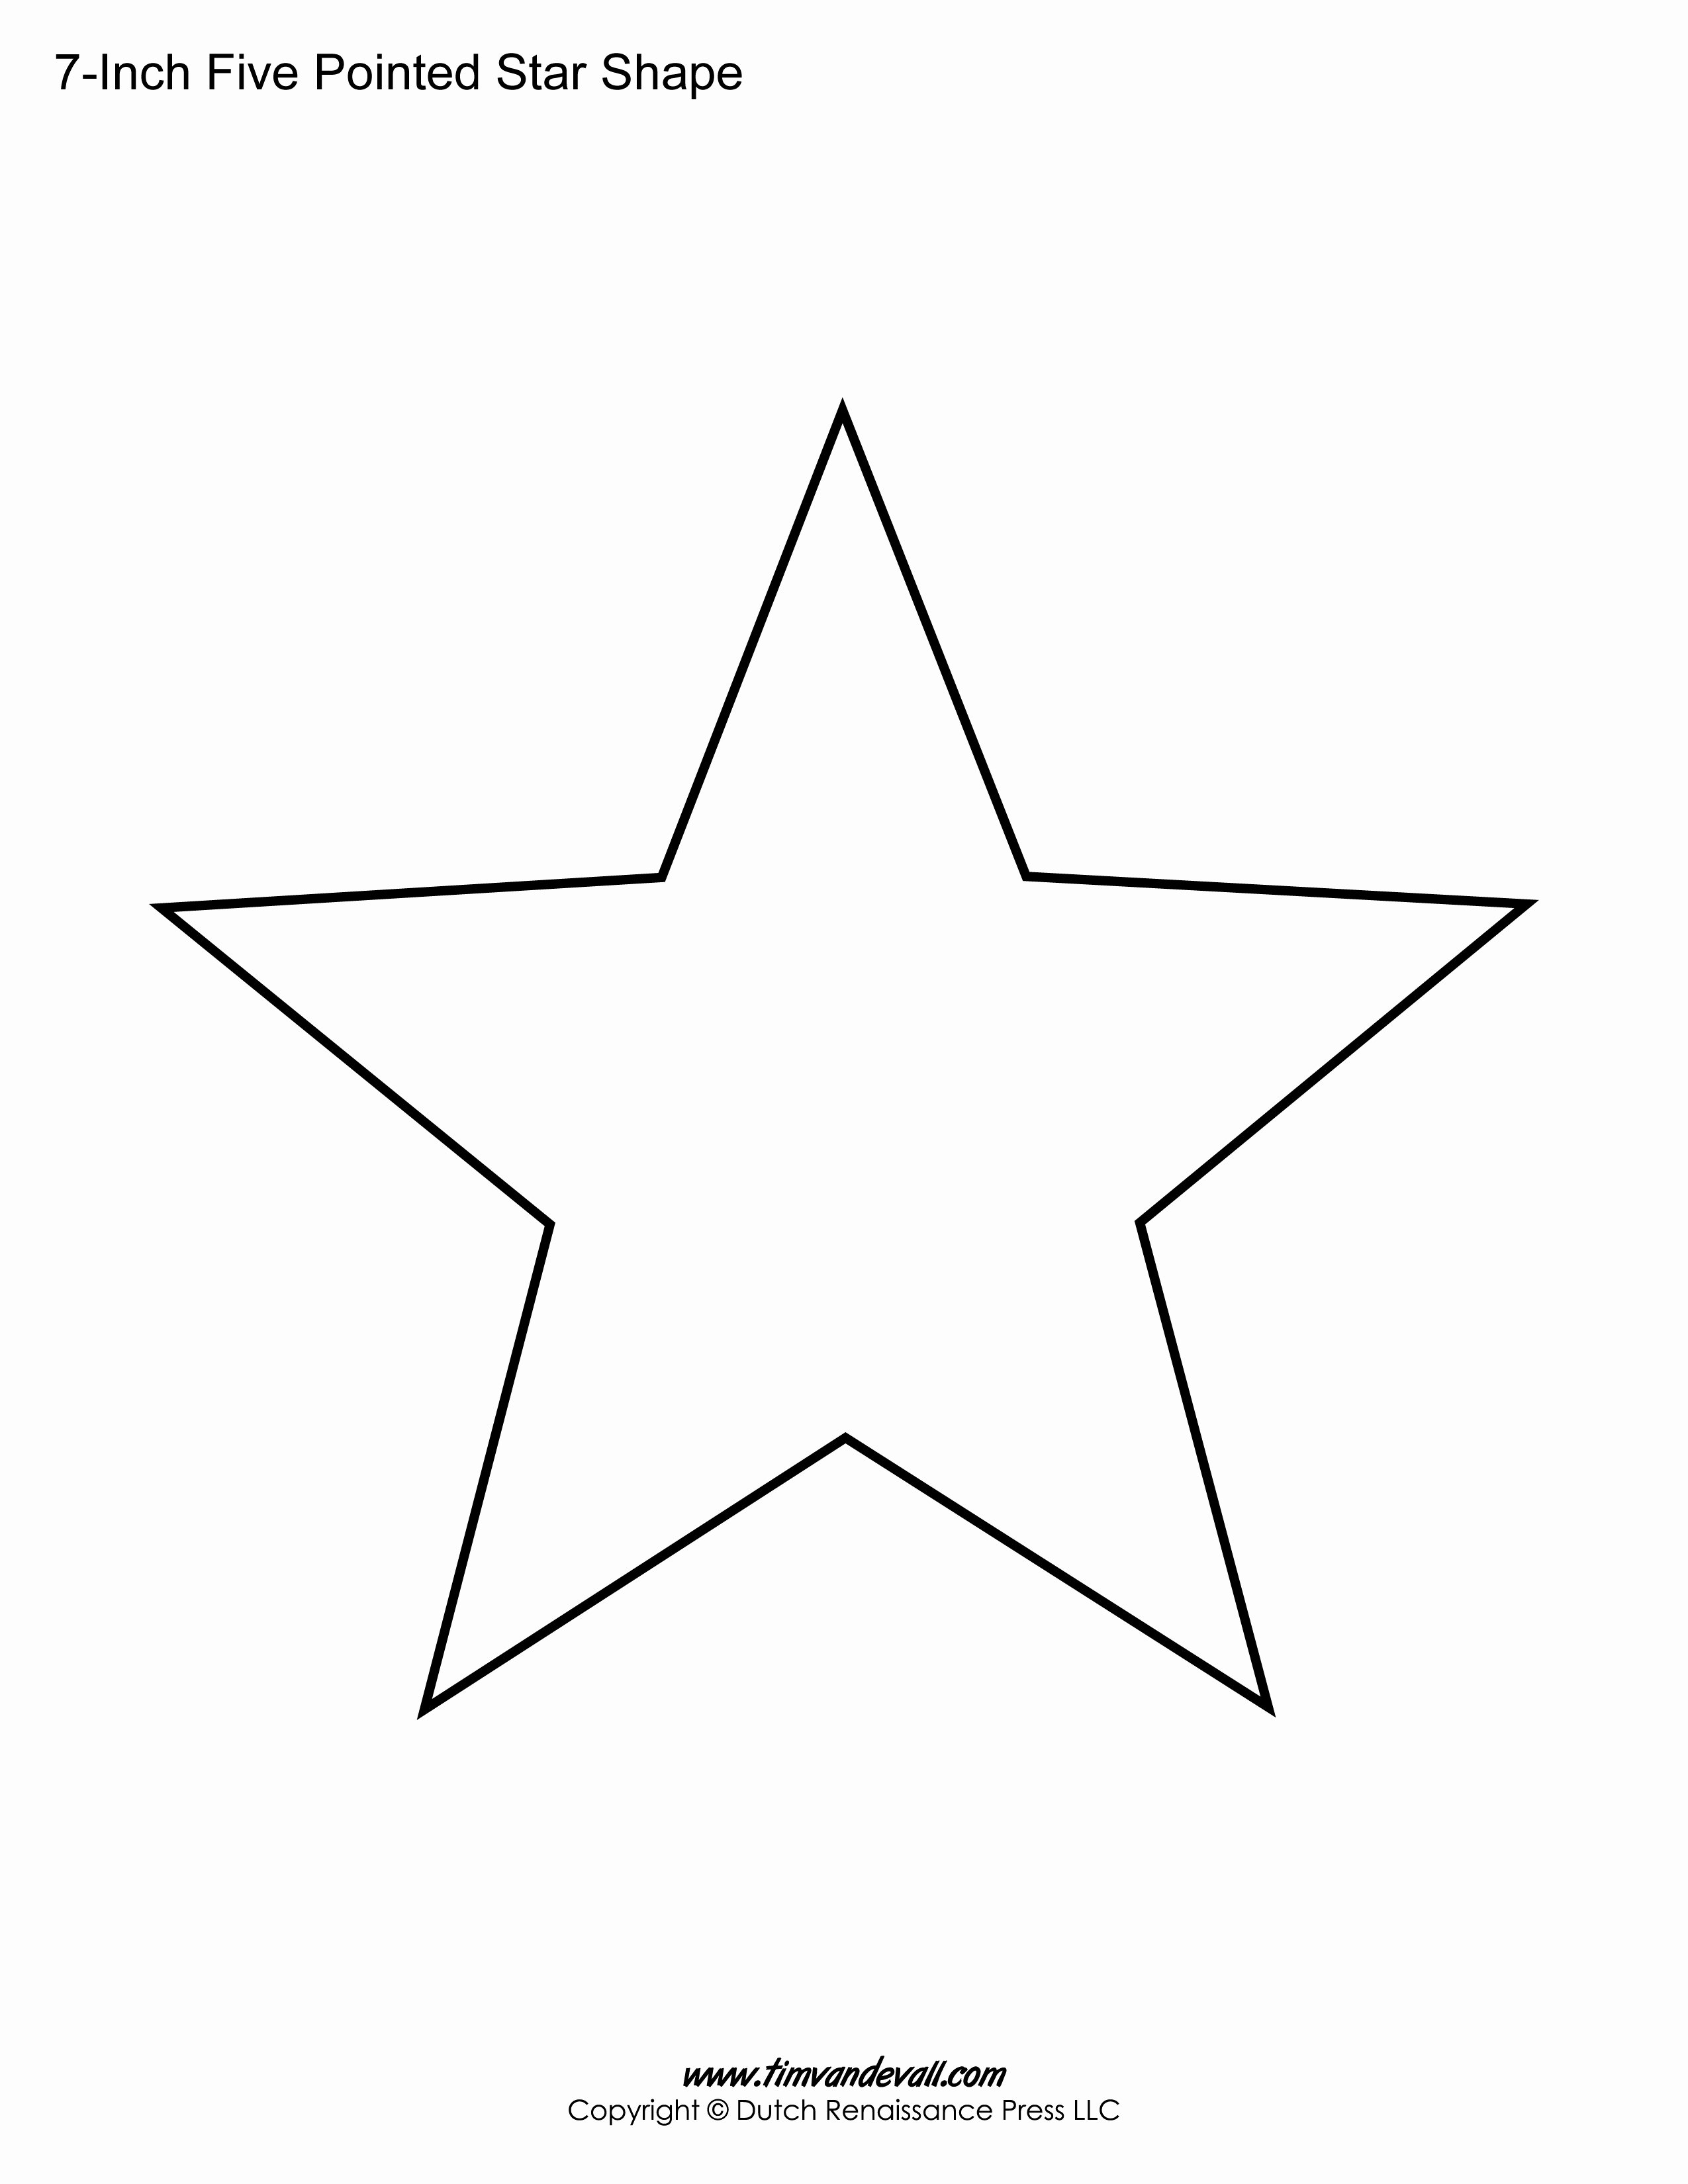 2 Inch Star Stencil Elegant Printable Five Pointed Star Templates Blank Shape Pdfs